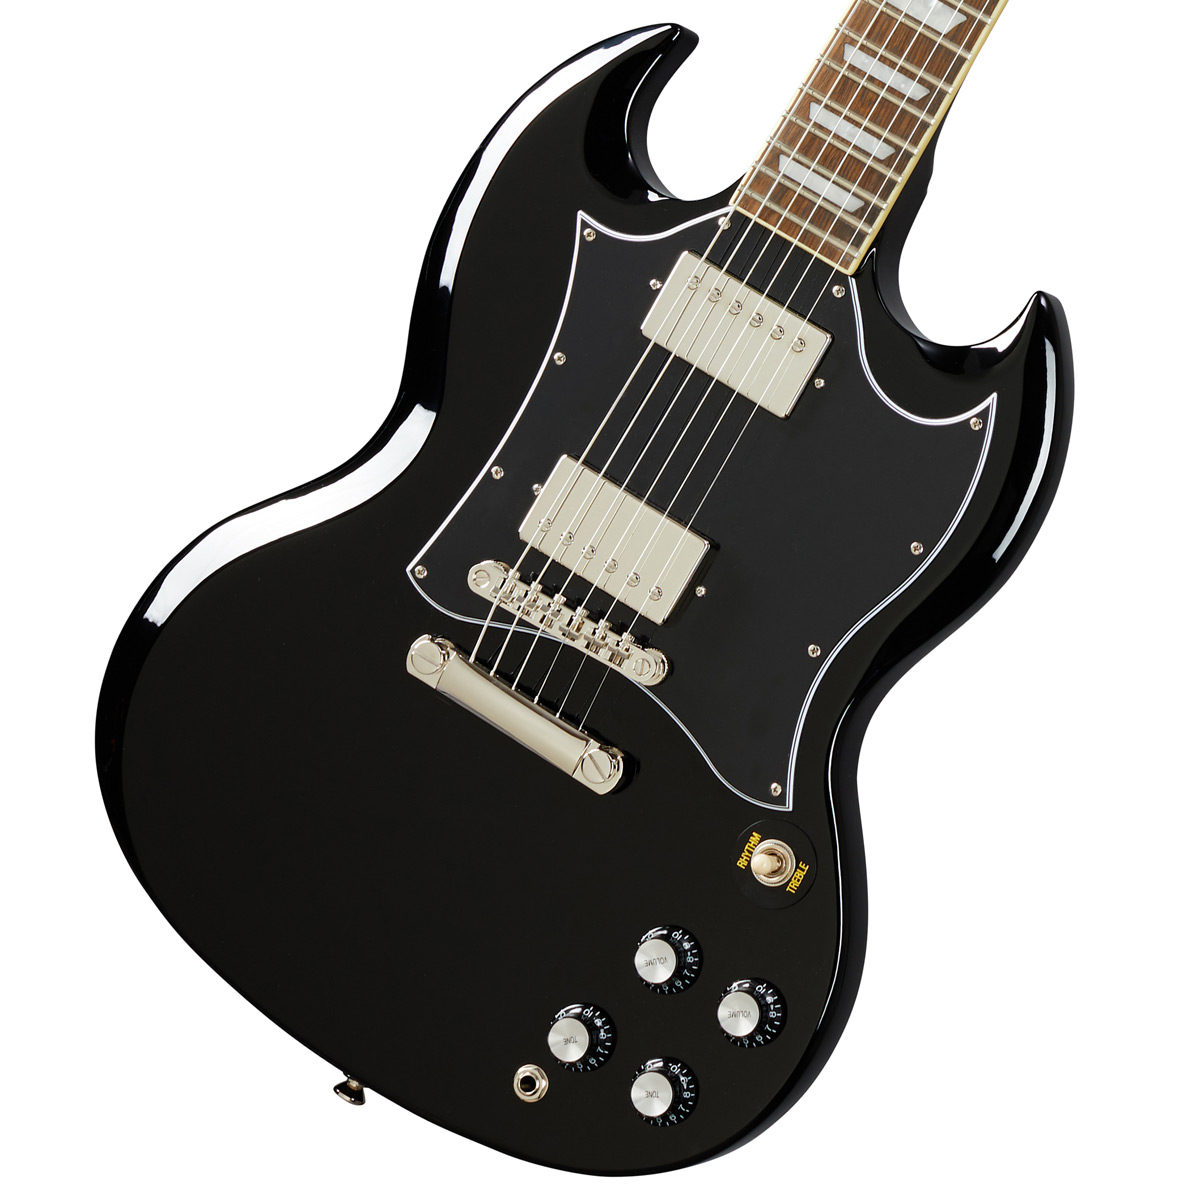 Epiphone / Inspired by Gibson SG Standard Ebony エピフォン エレキギター